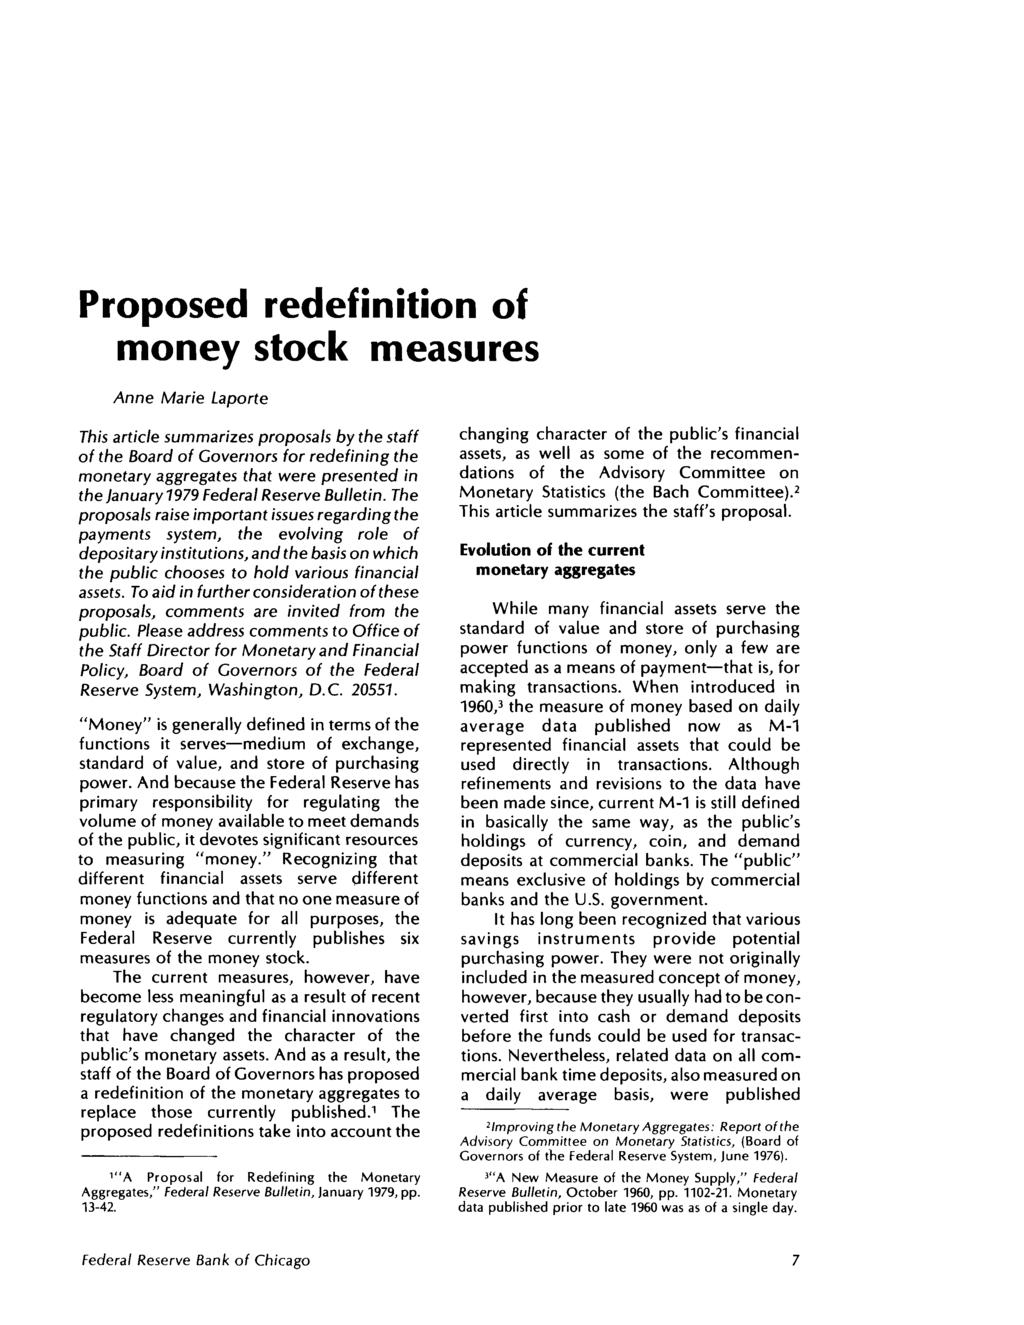 Proposed redefinition of money stock measures Anne Marie Laporte This article summarizes proposals by the staff of the Board of Governors for redefining the monetary aggregates that were presented in